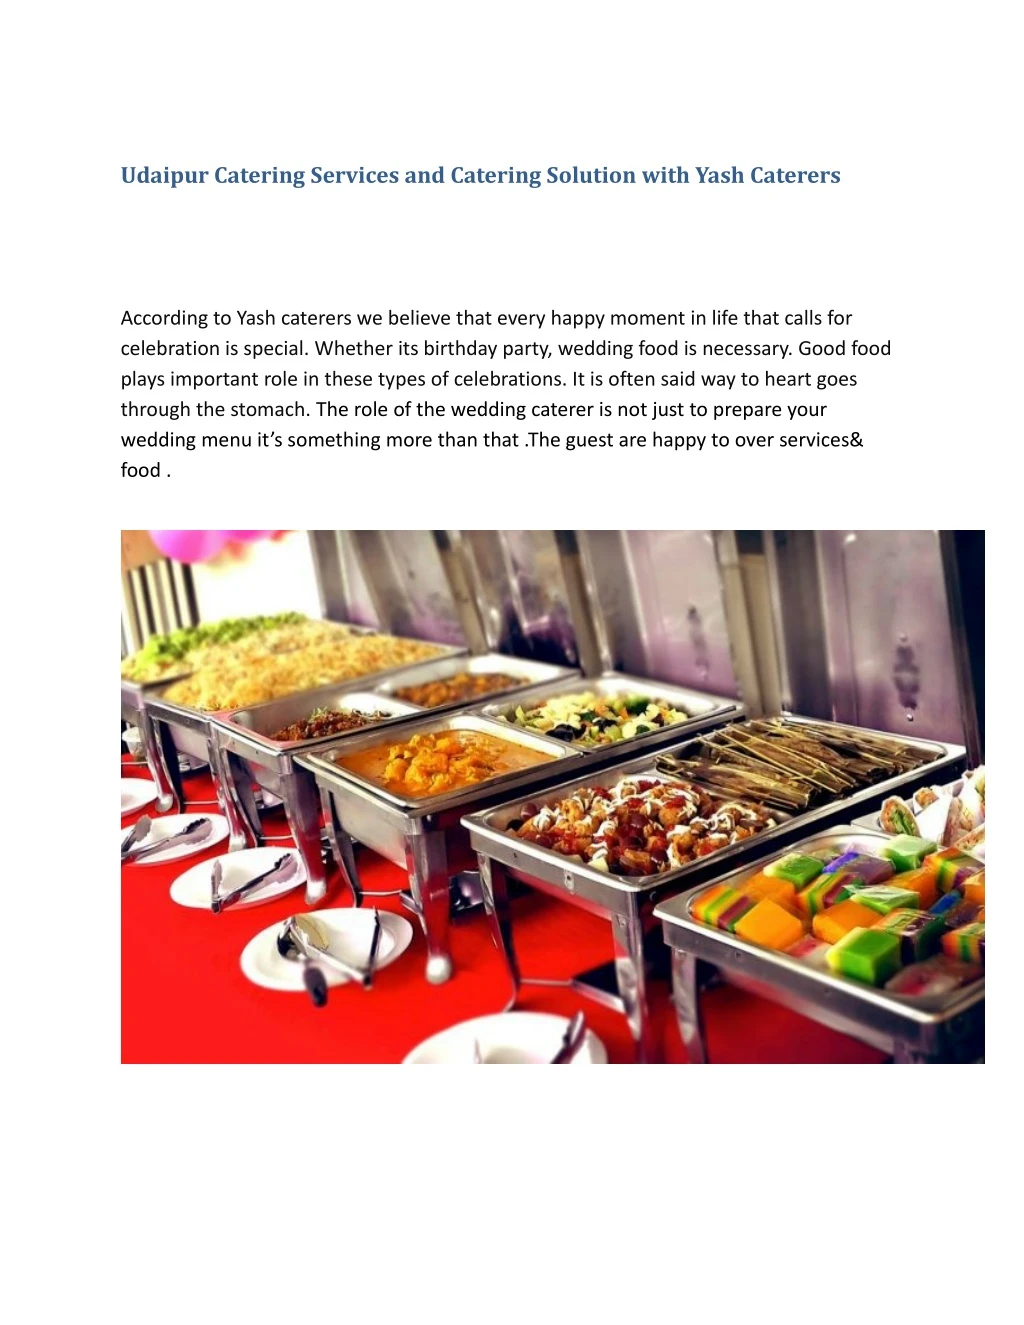 udaipur catering services and catering solution